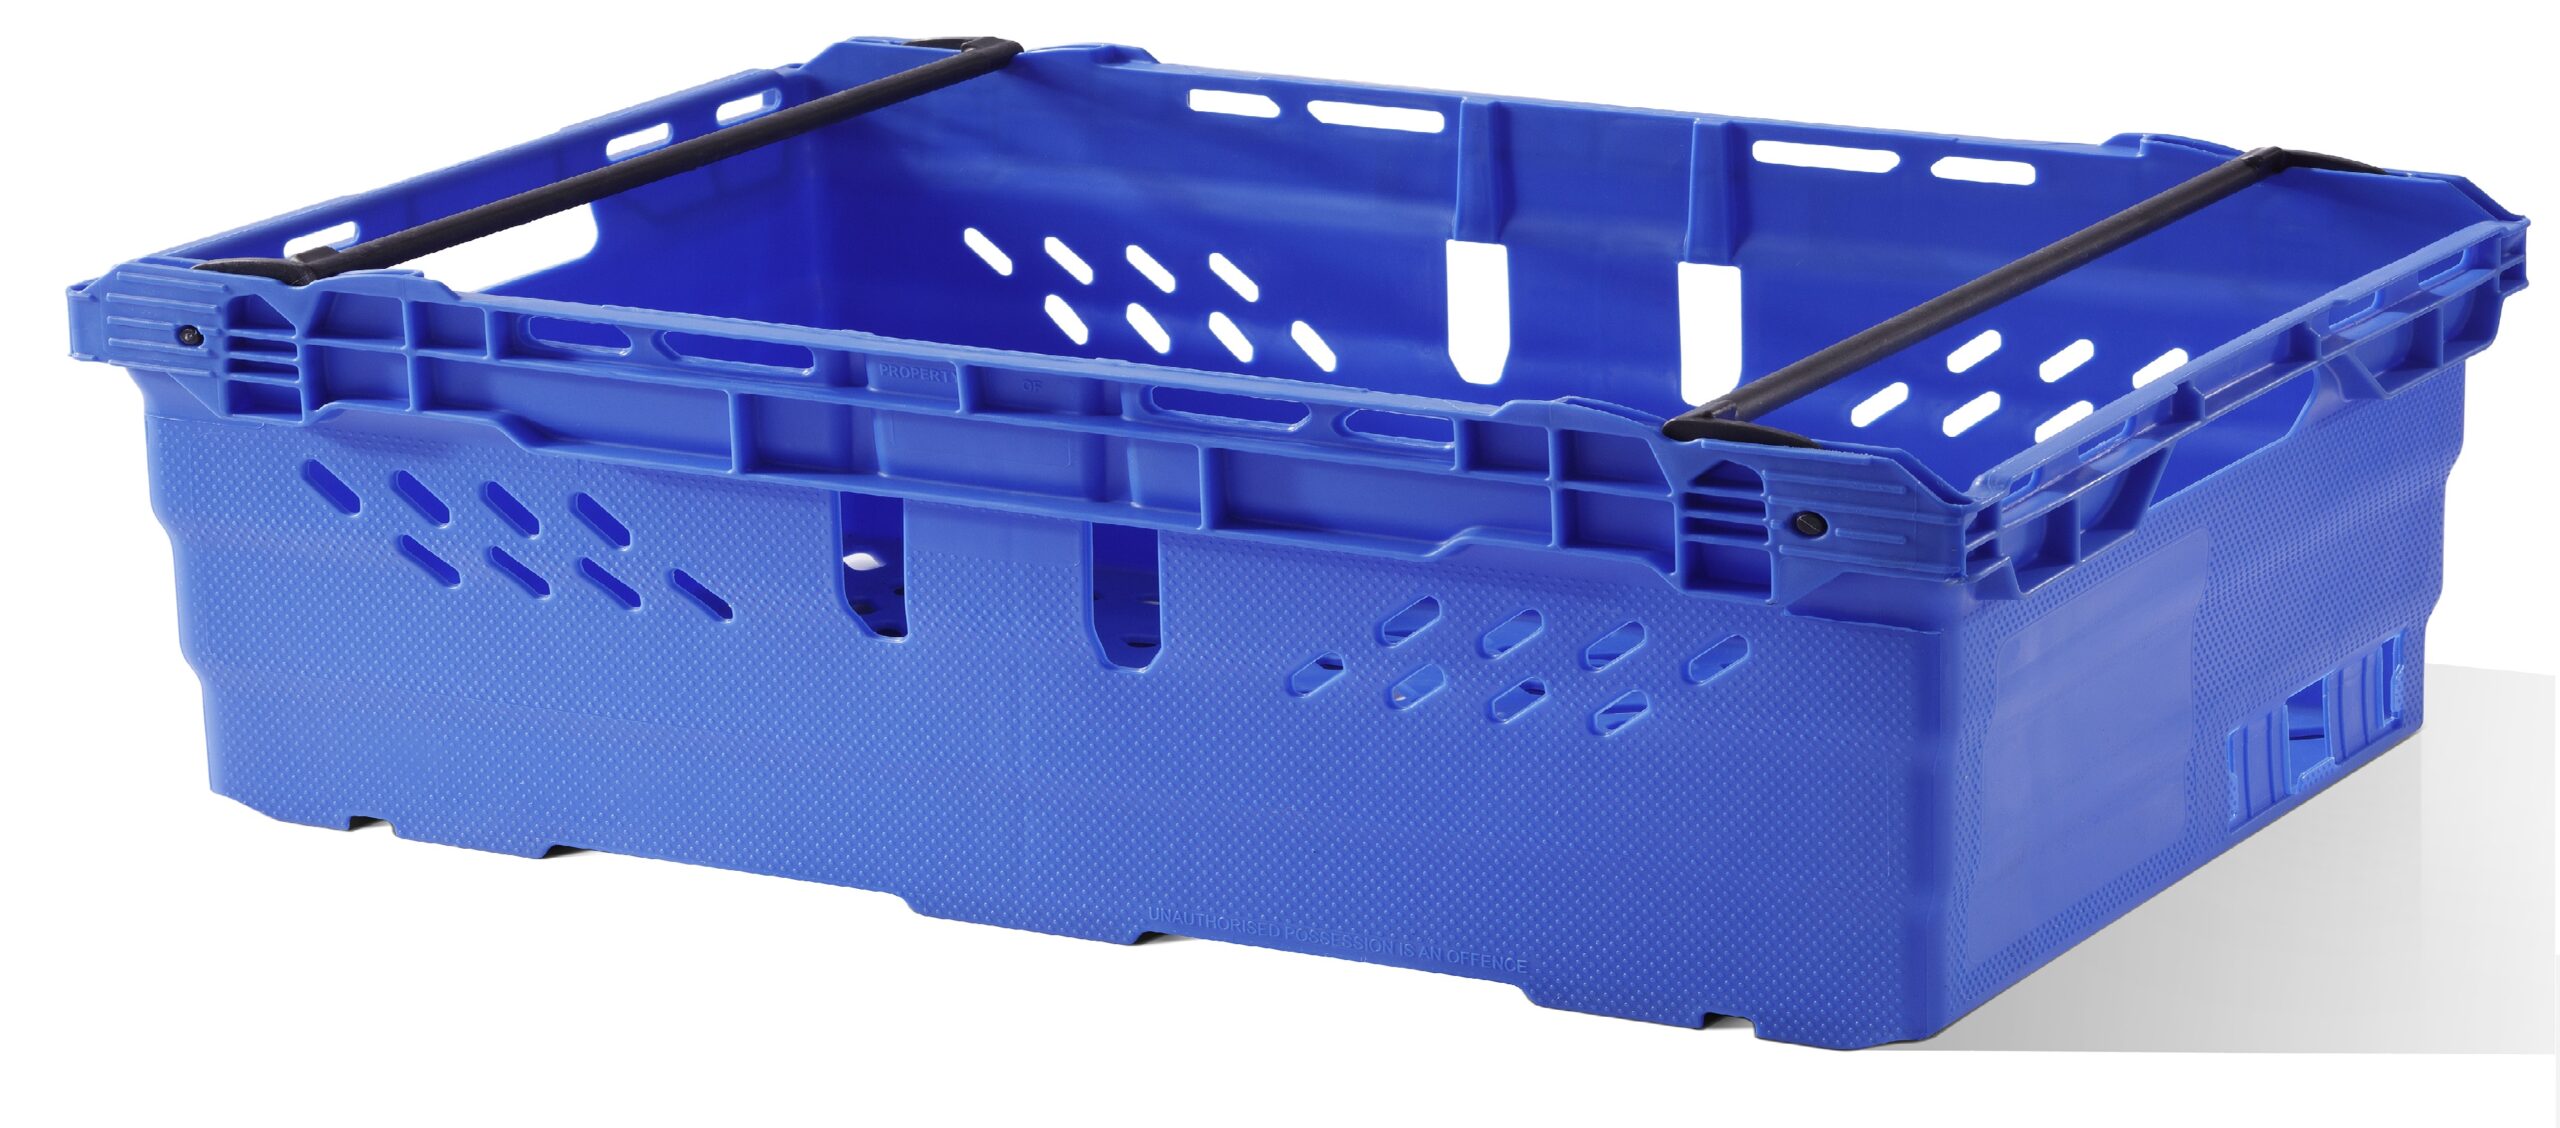 600x400x250 Bale Arm Crate - Green For Supermarkets